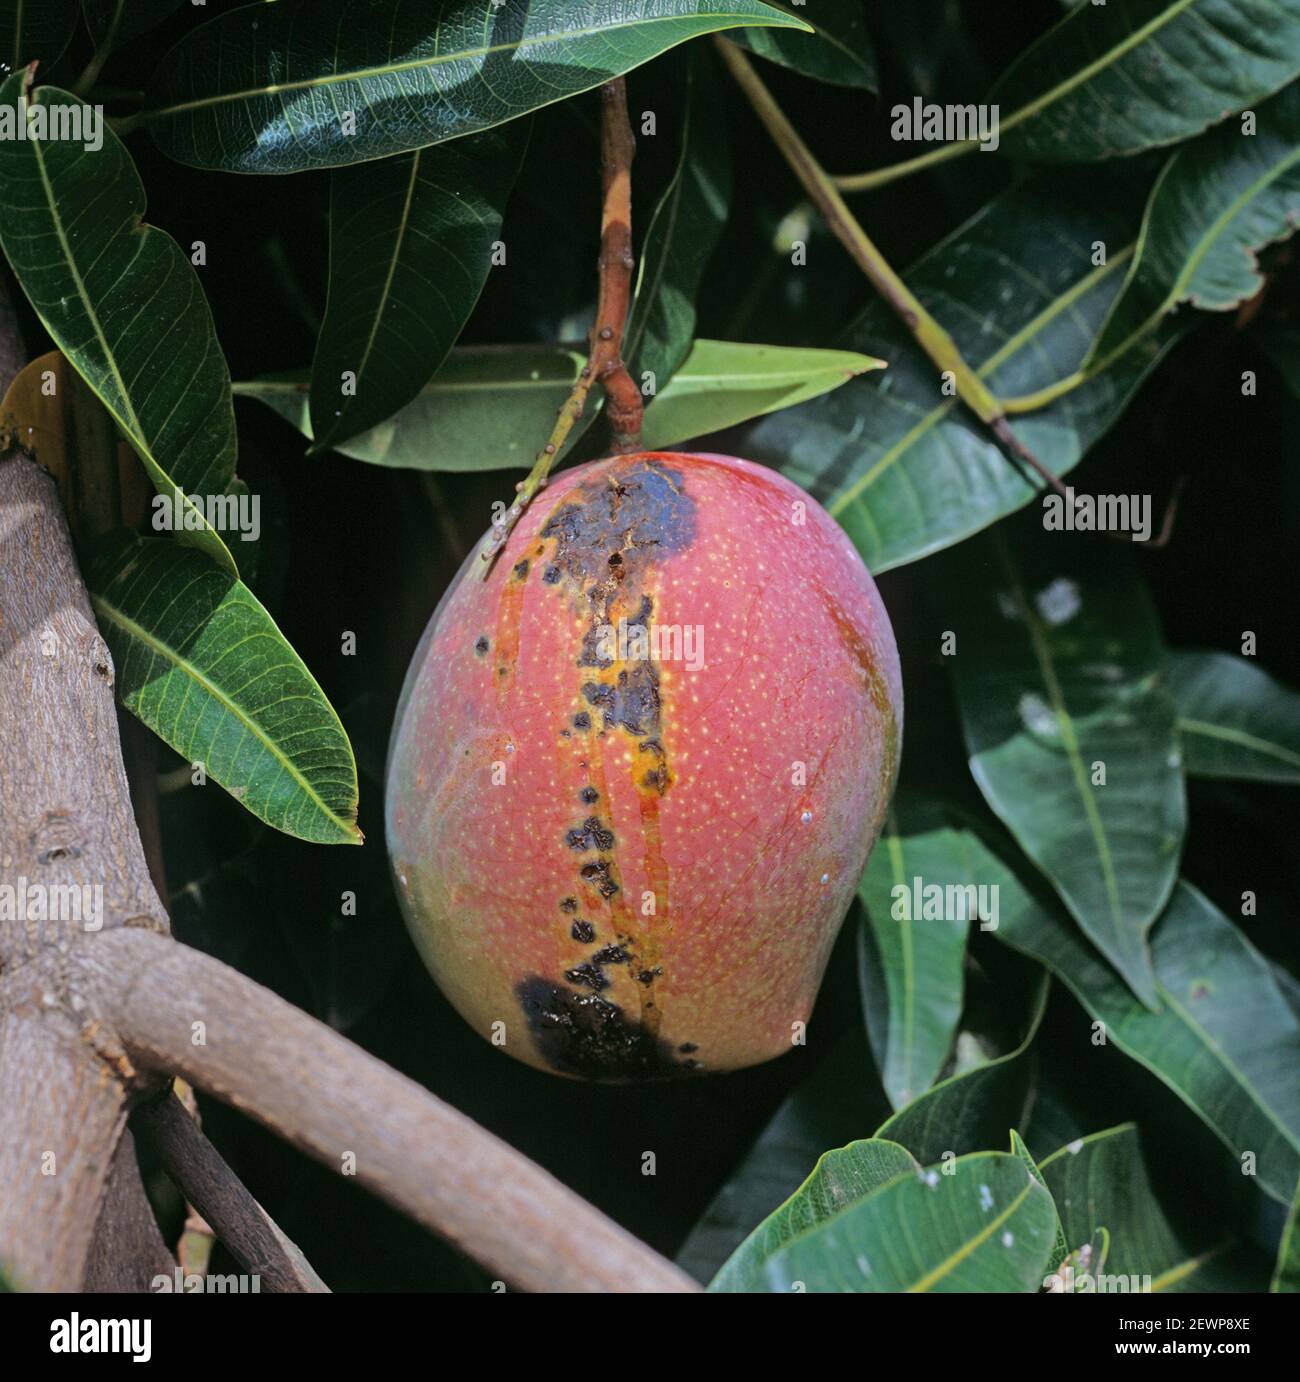 Anthracnose (Colletotrichum gloeosporioides) lesions and weeping on a mango fruit on the tree, Transvaal, South Africa, February Stock Photo